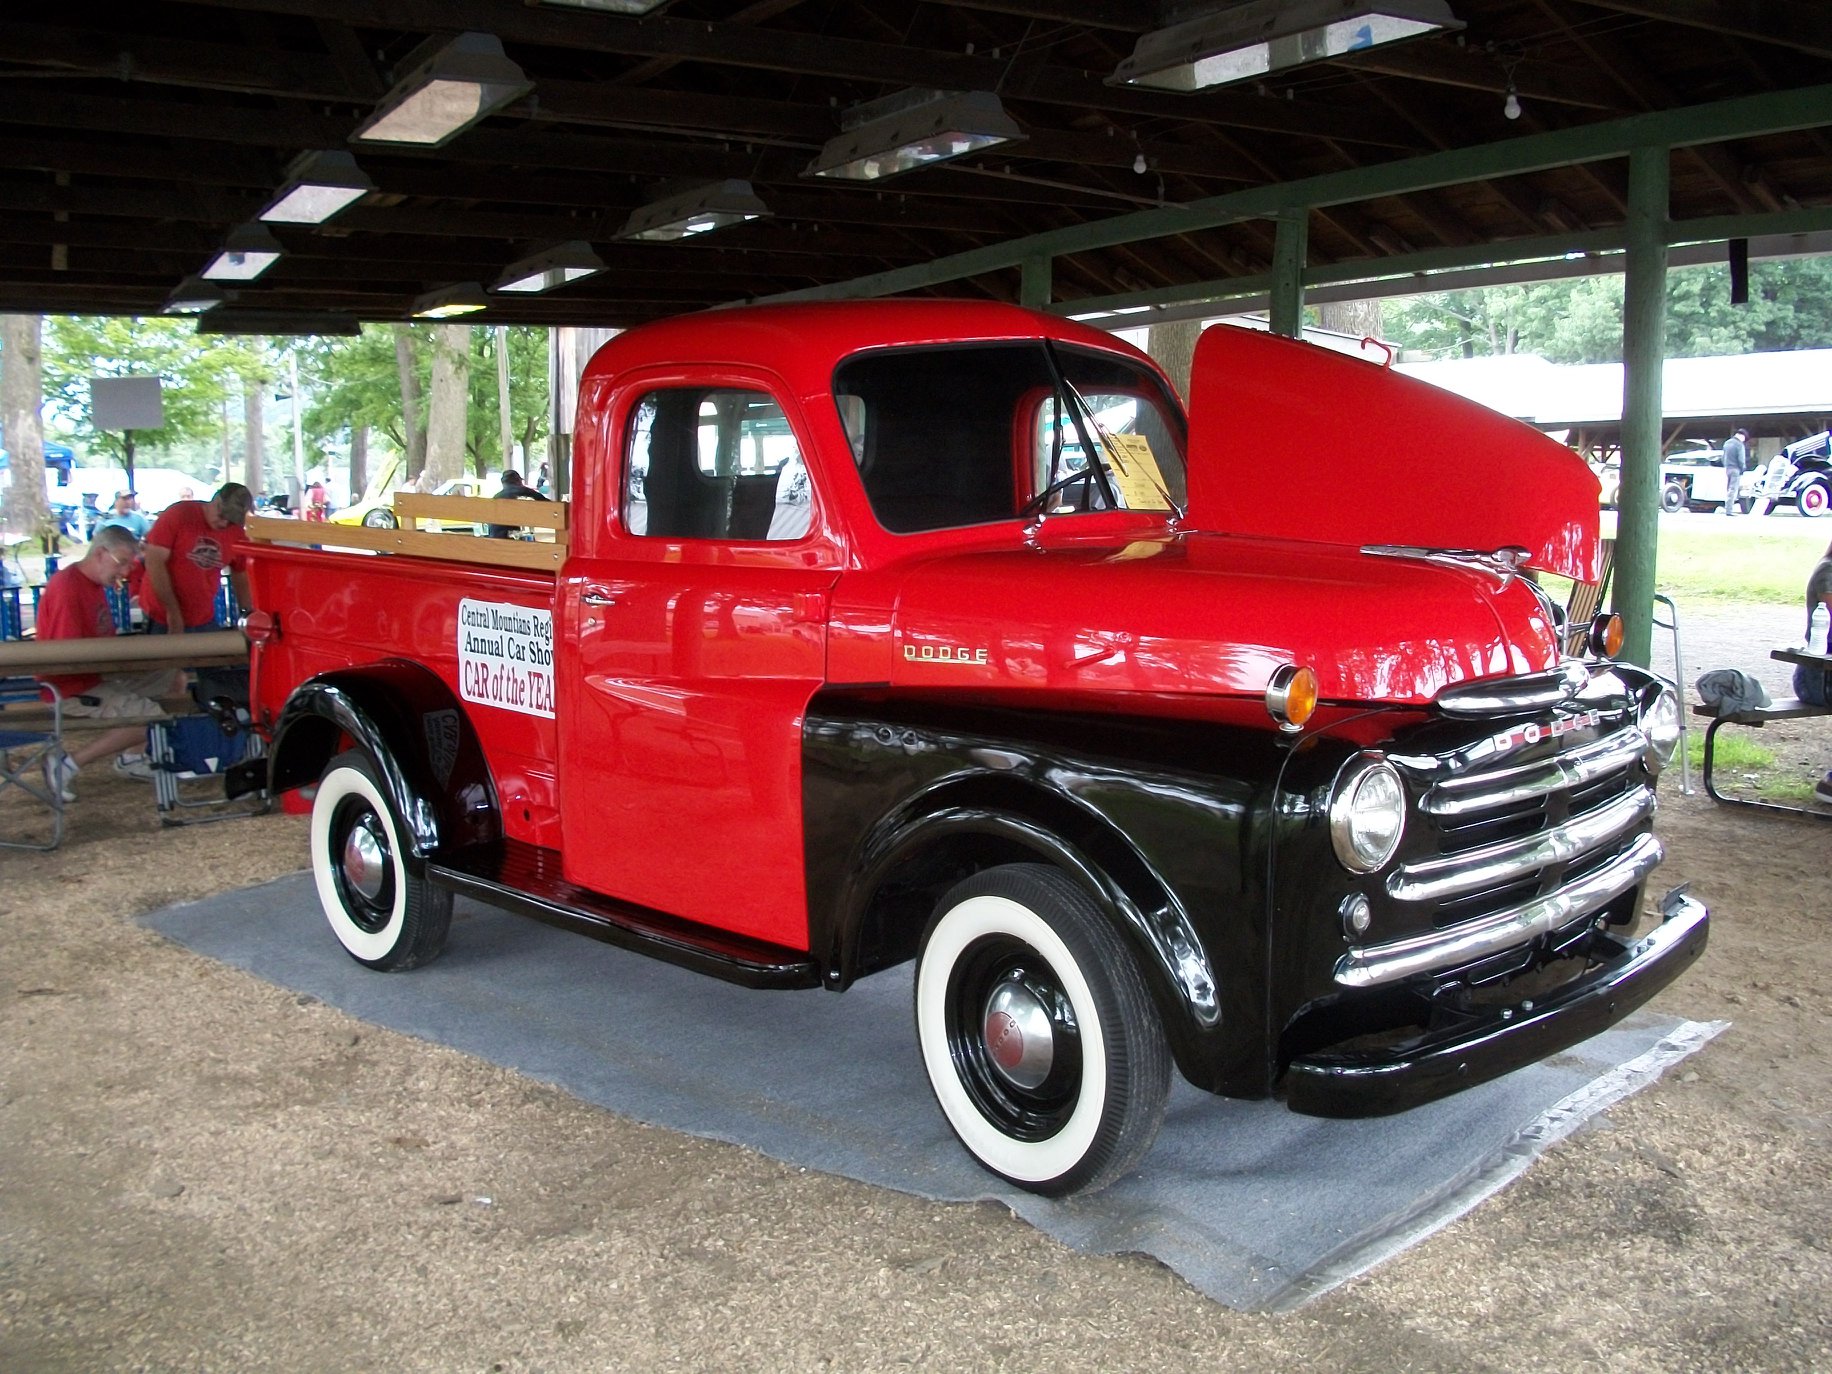 This 1948 Dodge B100 was the Central Mountains Region AACA’s “Car of the Year.” It is owned by Walt and Jean Gormont of Clearfield and was on display under the wilderness shelter at the 42nd annual Antique and Custom Auto Show at the Clearfield Driving Park on Aug. 19. (Provided photo)